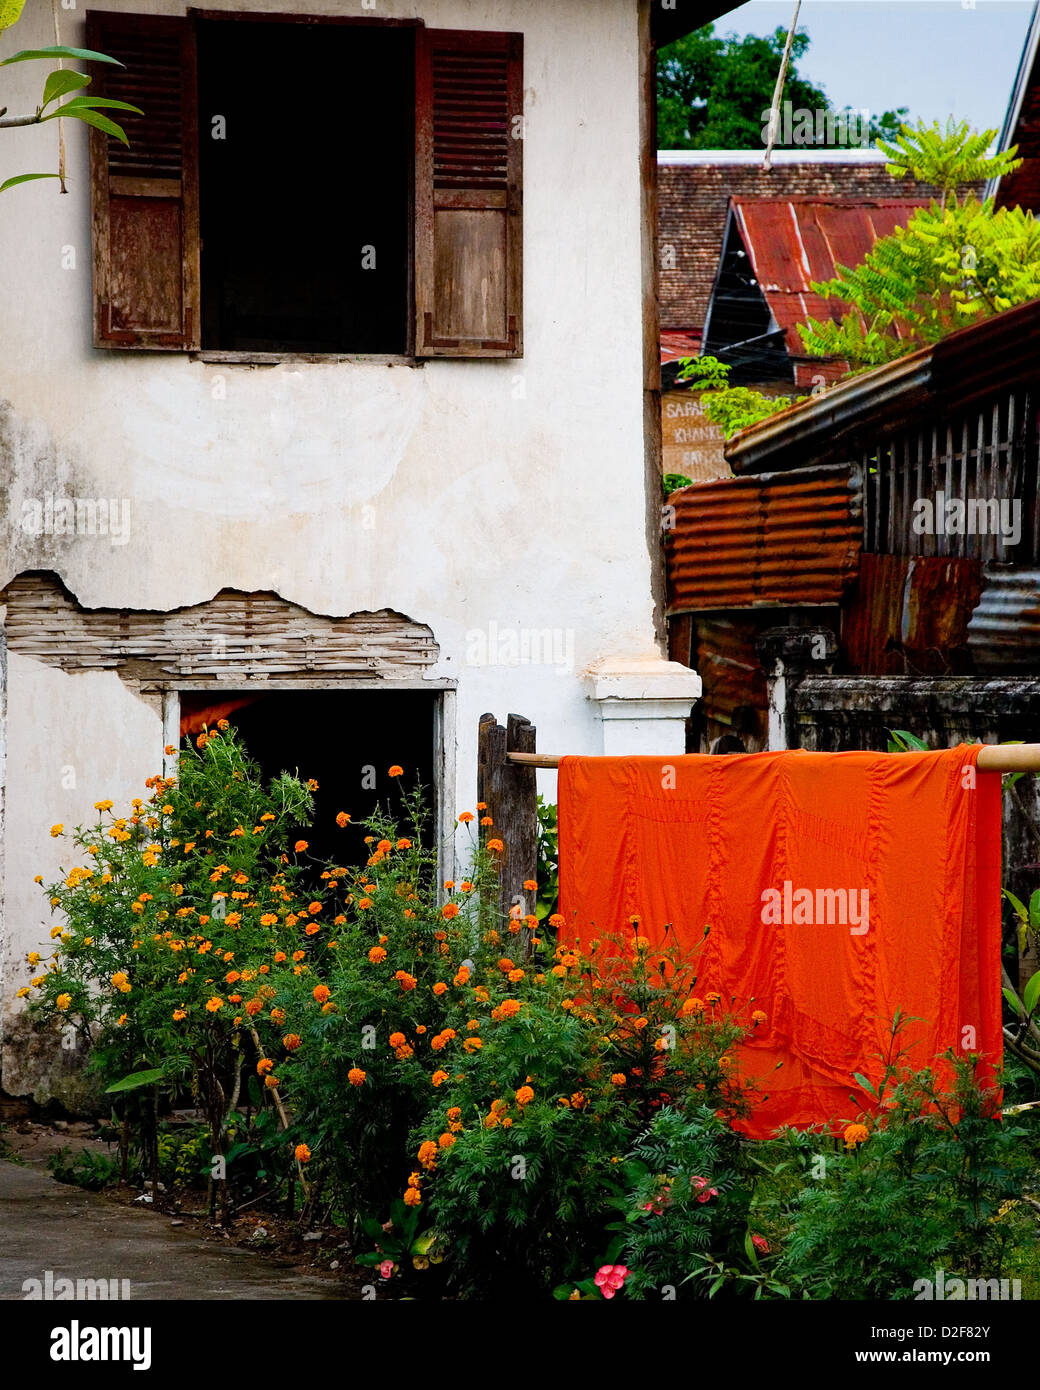 Monks' robes drying in the yard of a monastery in Luang Prabang, Laos Stock Photo